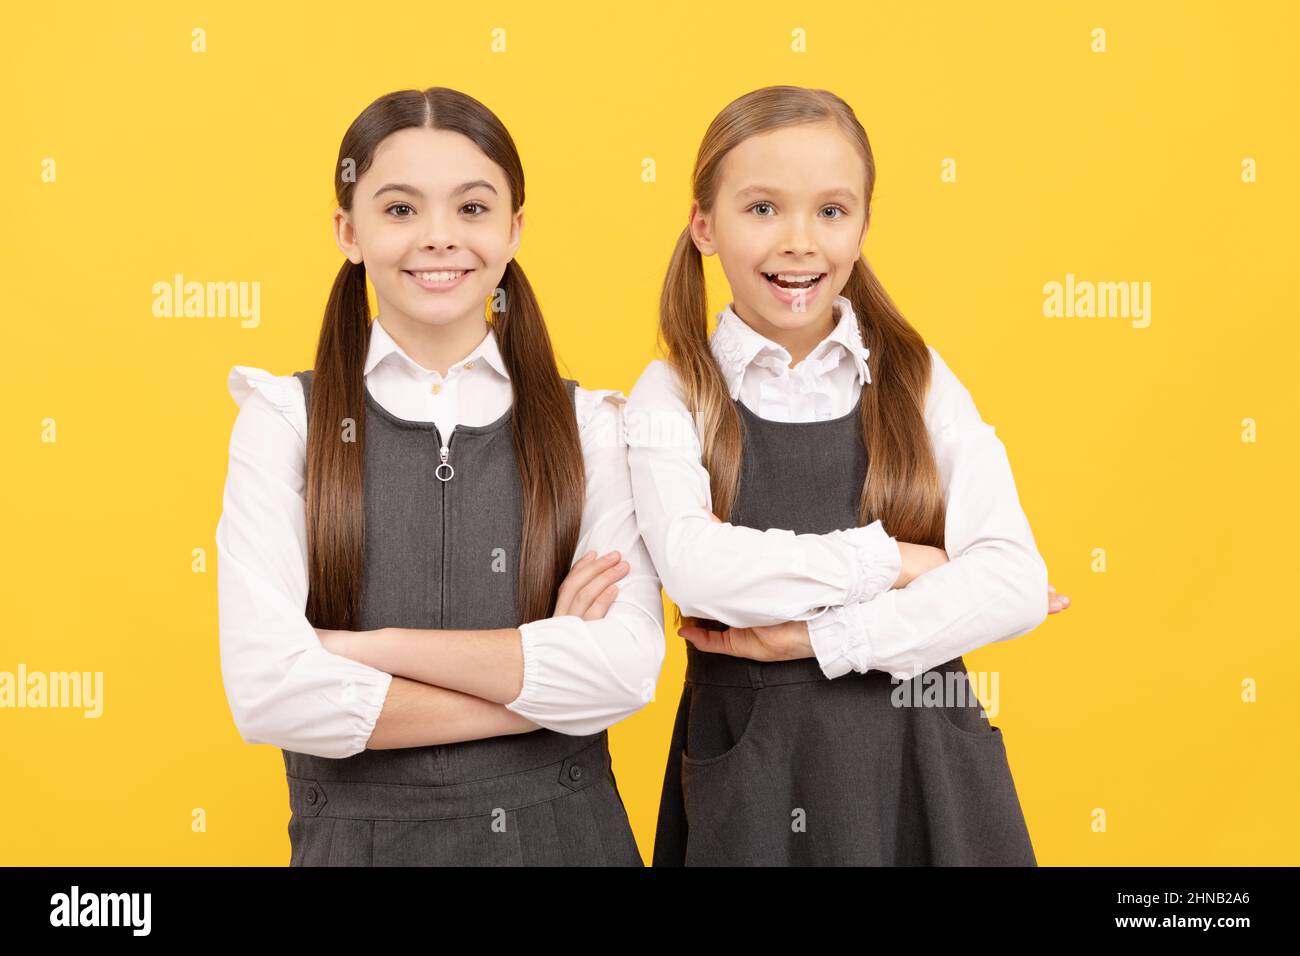 Educating the little minds. School children yellow background. Back to school. Childhood education Stock Photo